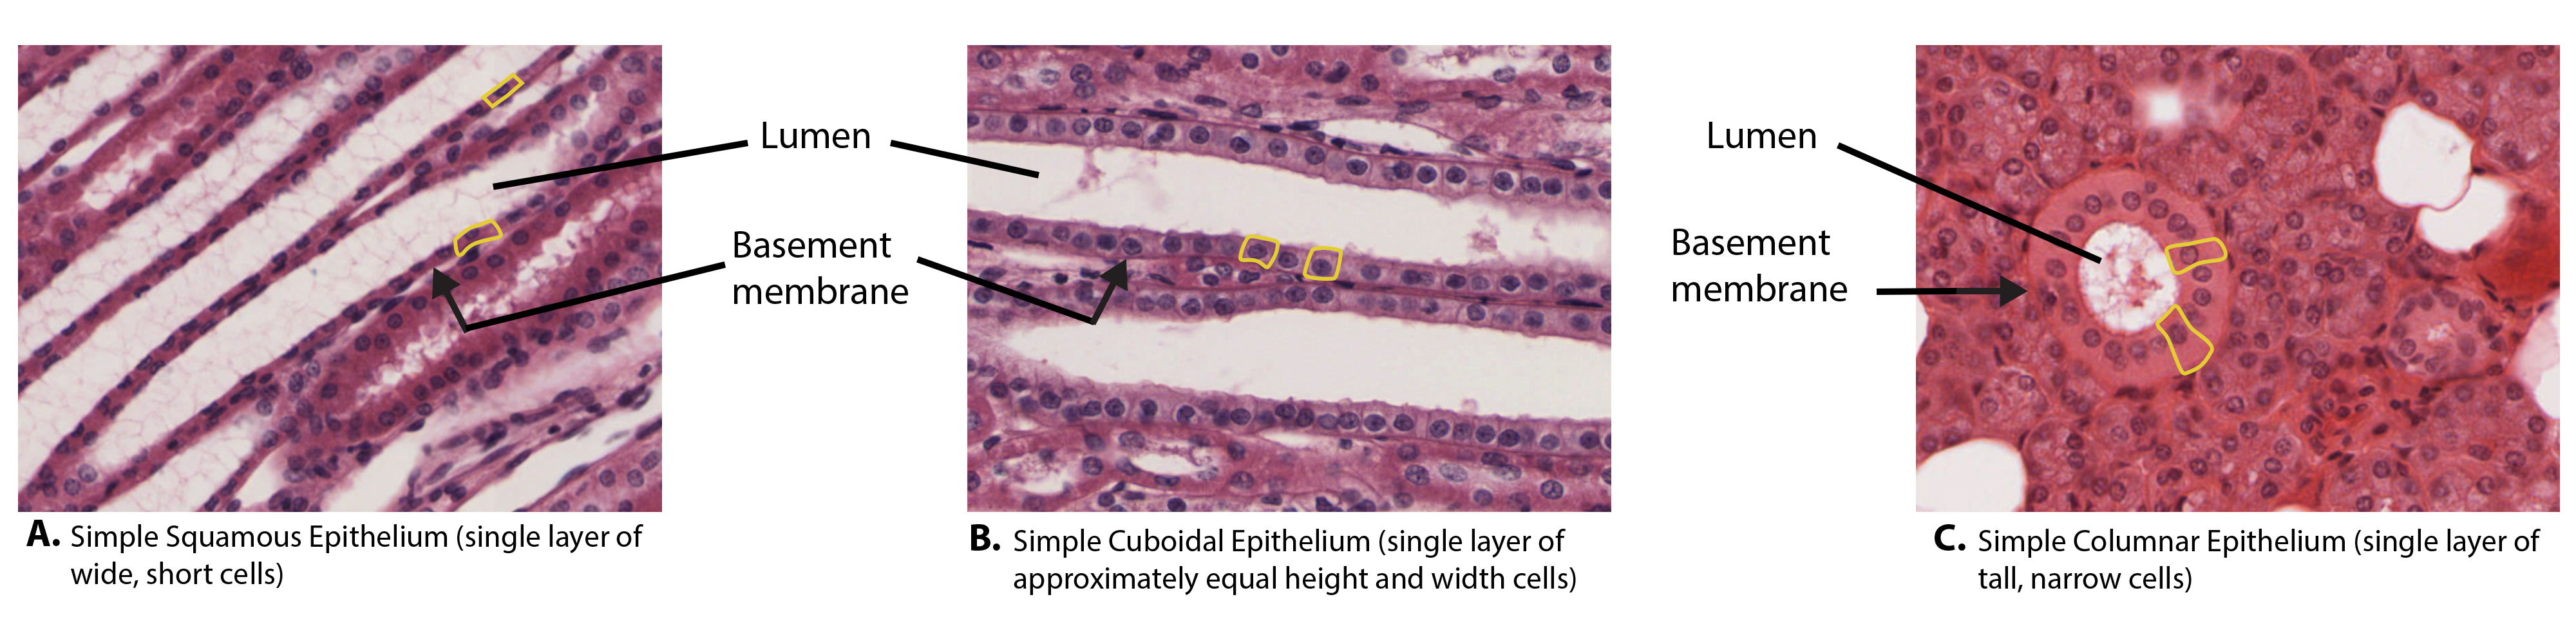 Histology_Simple_Epithelia_400x.png